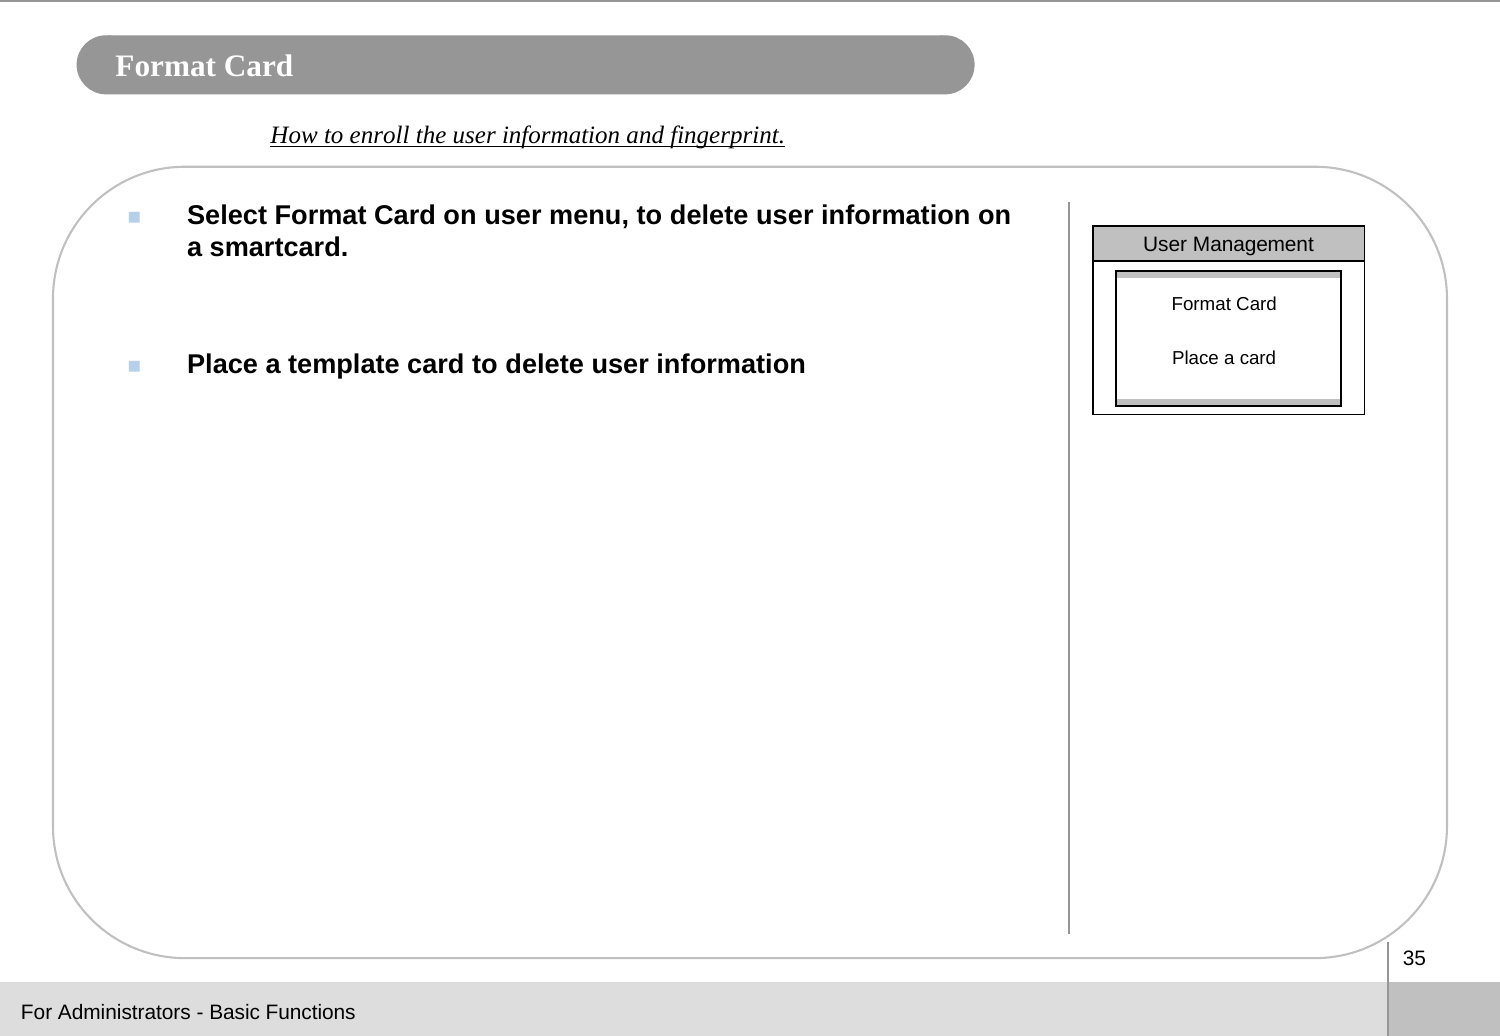 35Format CardSelect Format Card on user menu, to delete user information on a smartcard. Place a template card to delete user informationHow to enroll the user information and fingerprint. For Administrators - Basic FunctionsUser ManagementFormat CardPlace a card